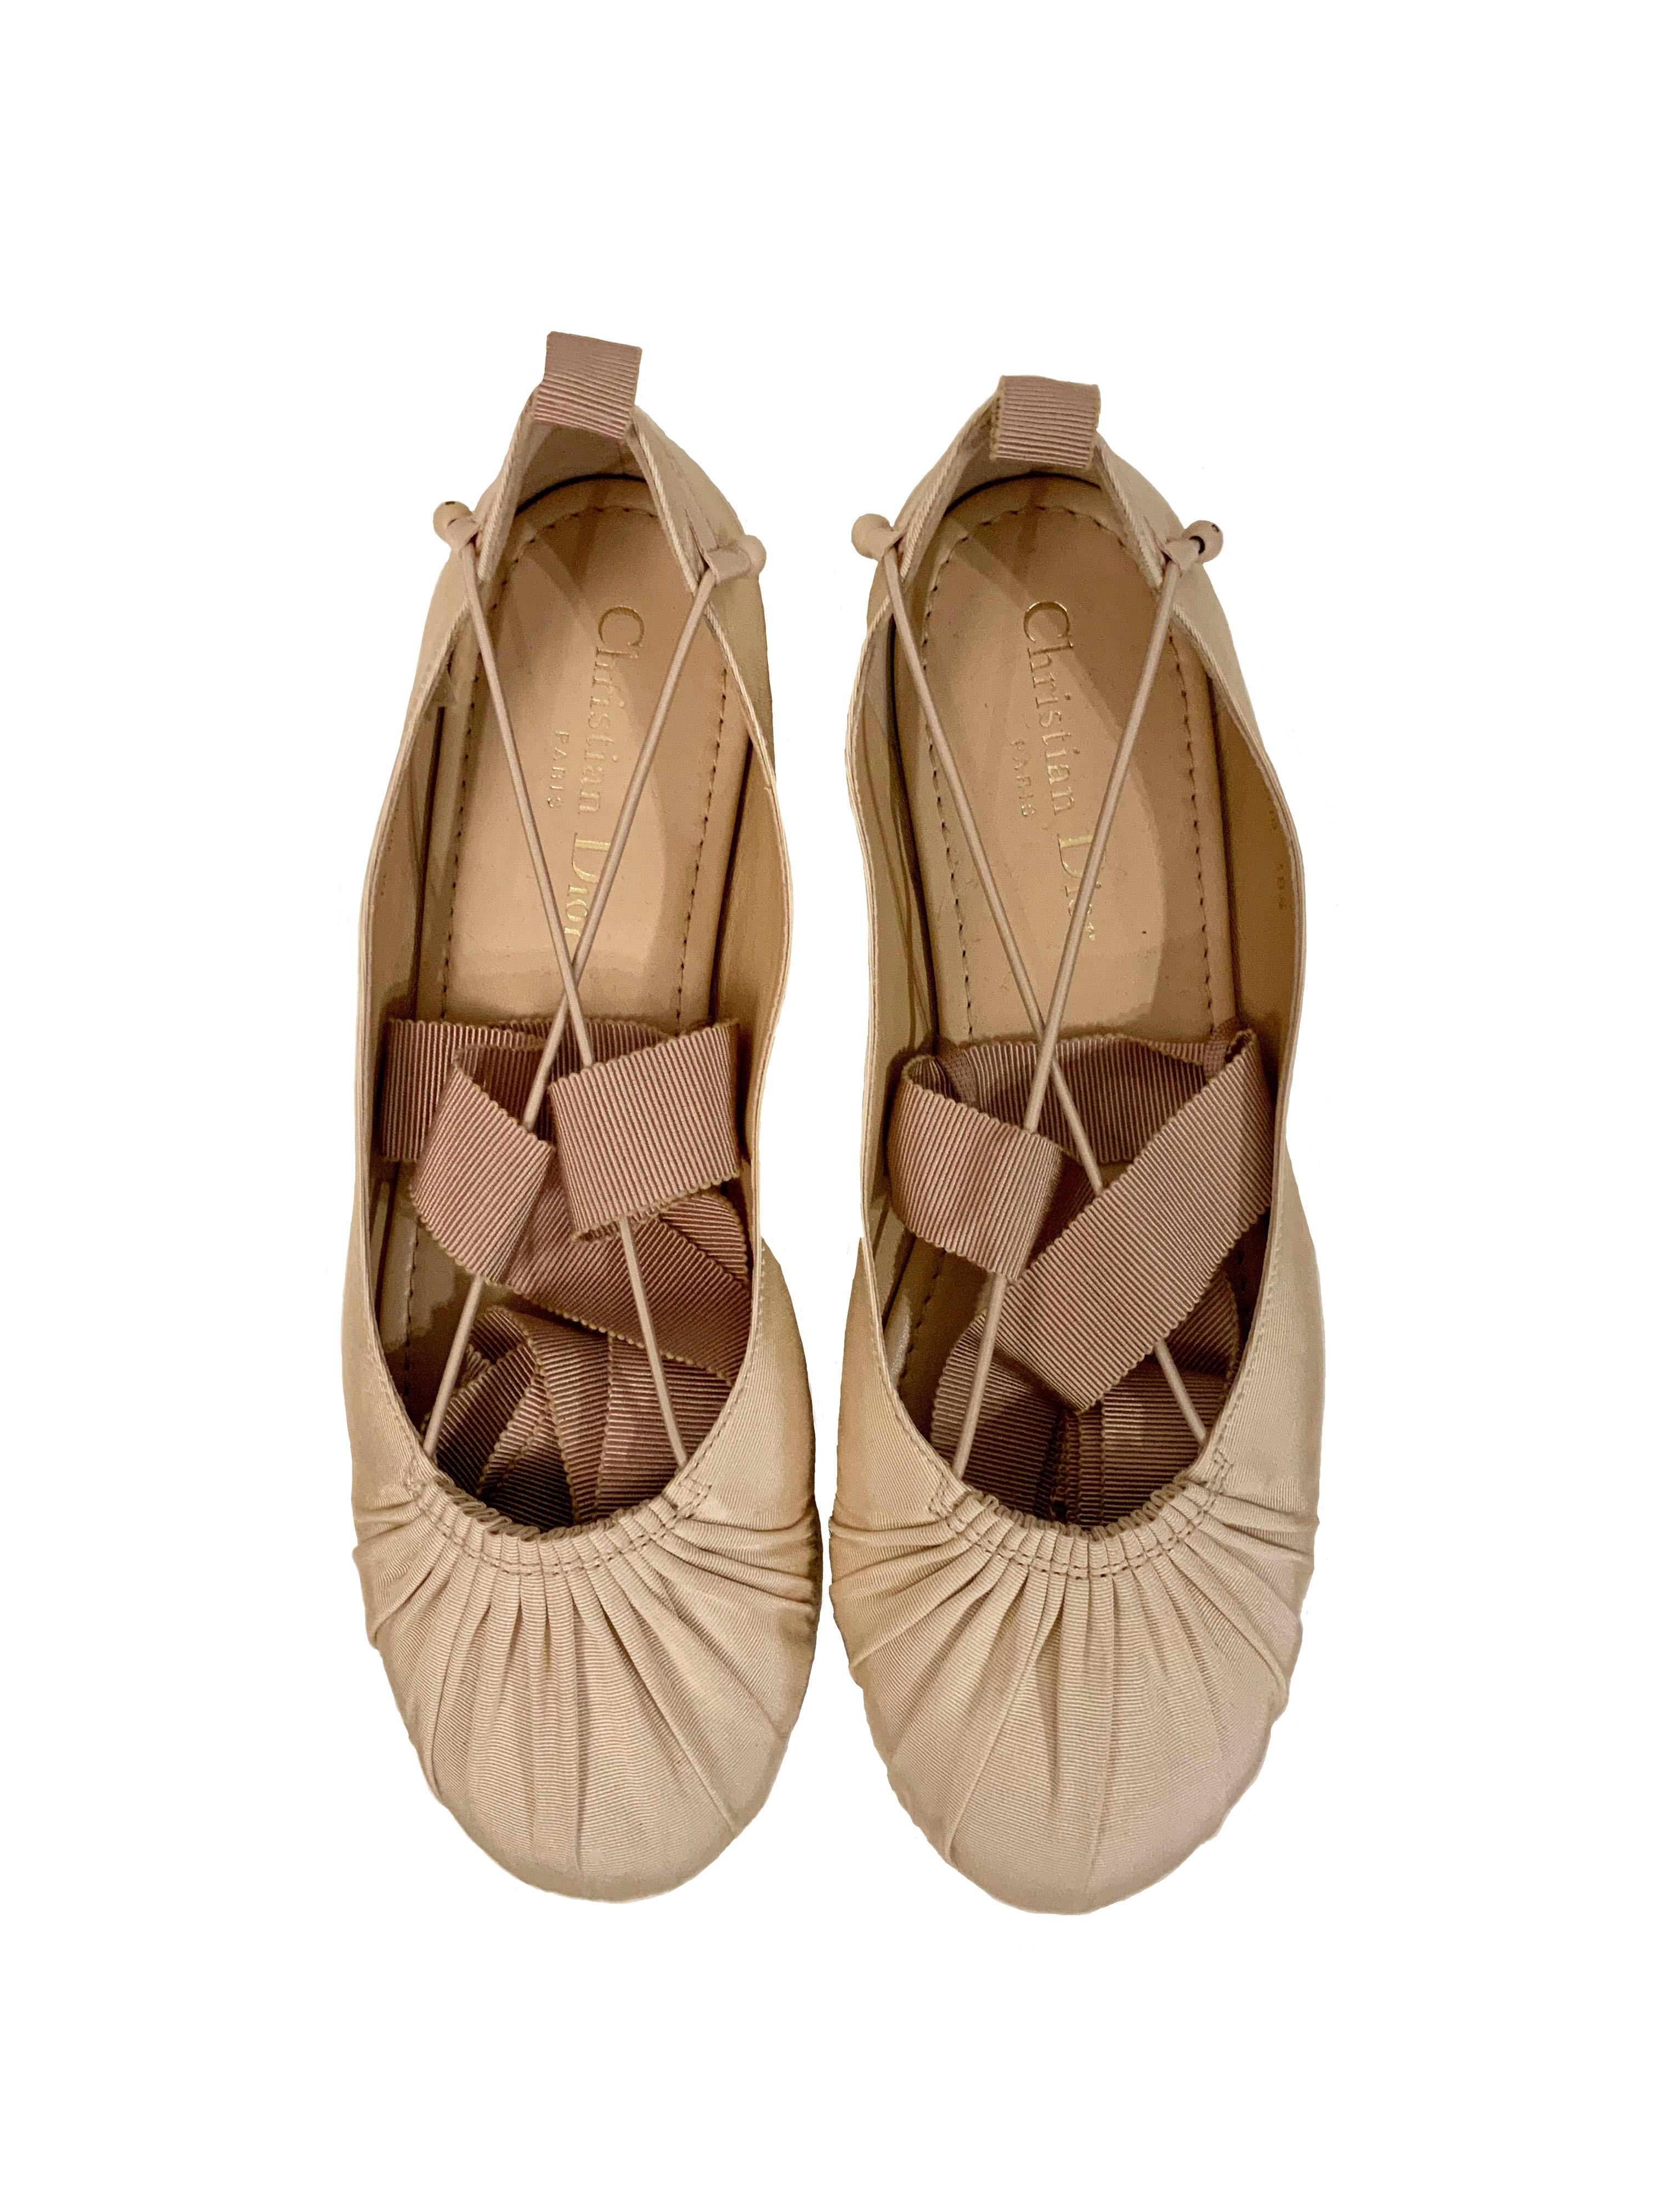 These pre-owned gorgeous ballerina flats are crafted in a nude color grain canvas. 
They feature grosgrain ribbon laces which wrap nicely around the ankle.
A lightly padded leather insole and a flexible suede sole with rubber pods.  

Collection :